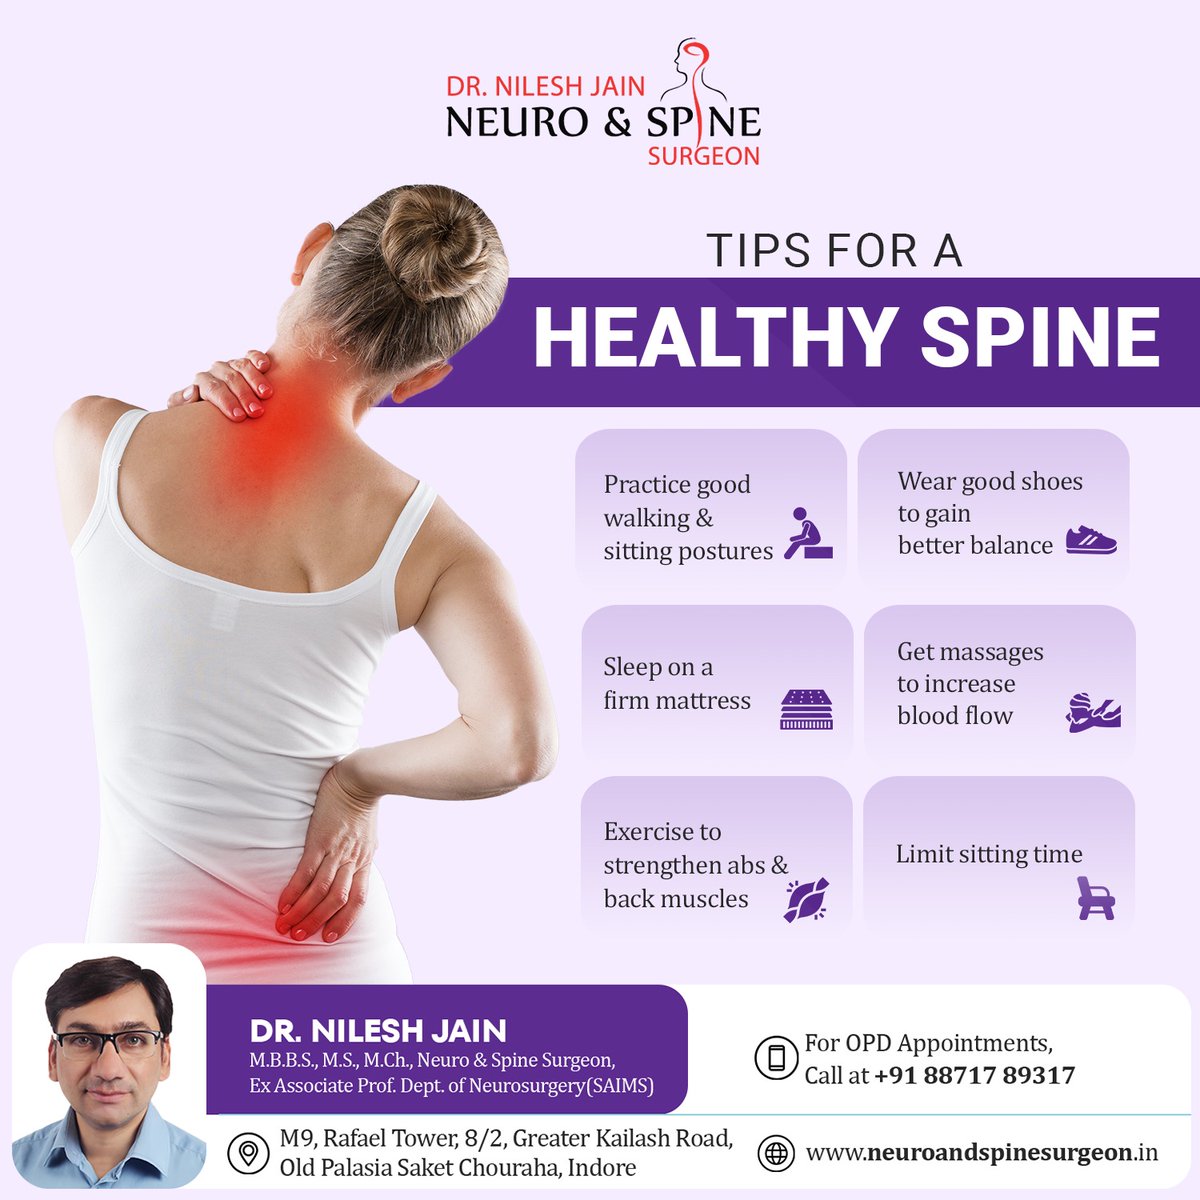 Tips for a Pain-Free Back and Better Posture! start your Journey to a More Active, Vibrant Life🗣️⭐️

Consult Dr. Nilesh Jain
📞+91 88717 89317
📍M9, Rafael Tower, 8/2, Greater Kailash Road, Old Palasia, Saket Chouraha, Indore

#SpineHealth #HealthyBack #PostureTips